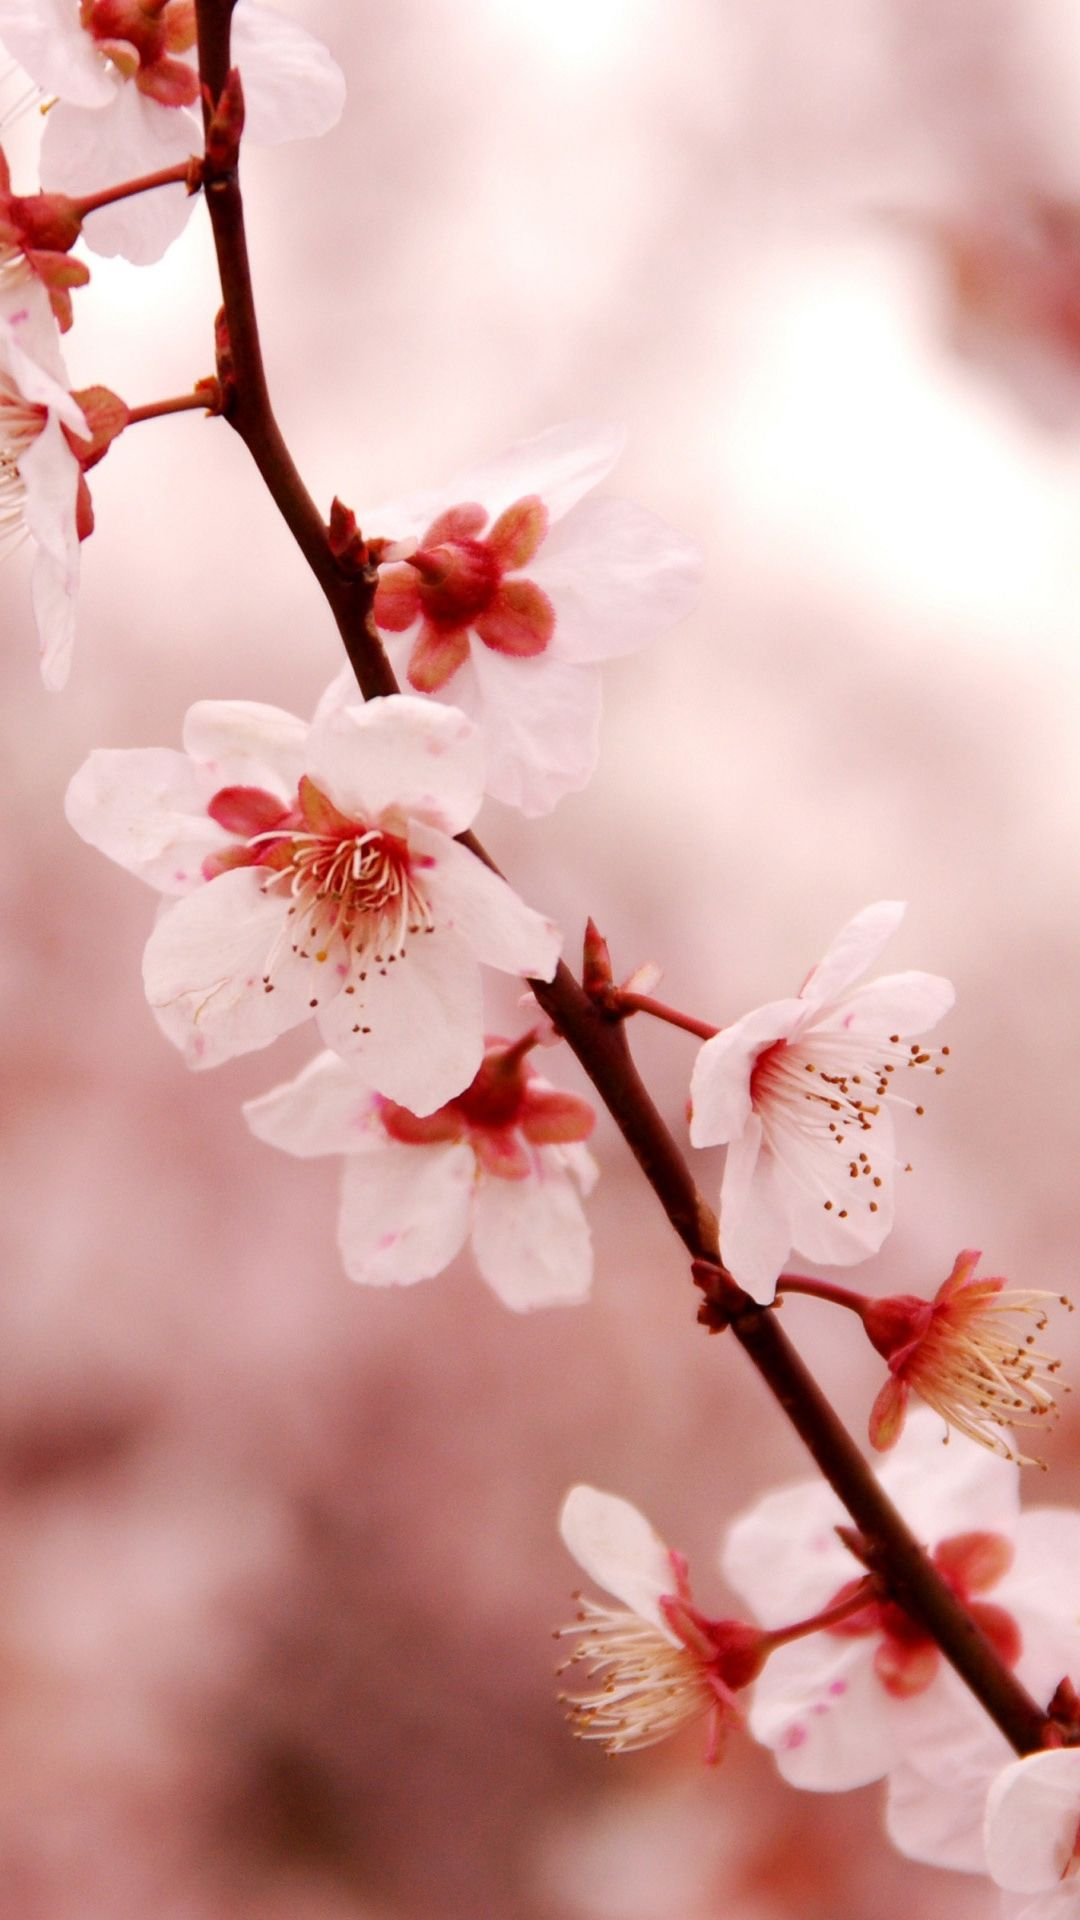 1080x1920 Cherry Blossom iPhone Wallpaper Download Free. | Cherry blossom wallpaper, New nature wallpaper, Cherry blossom background